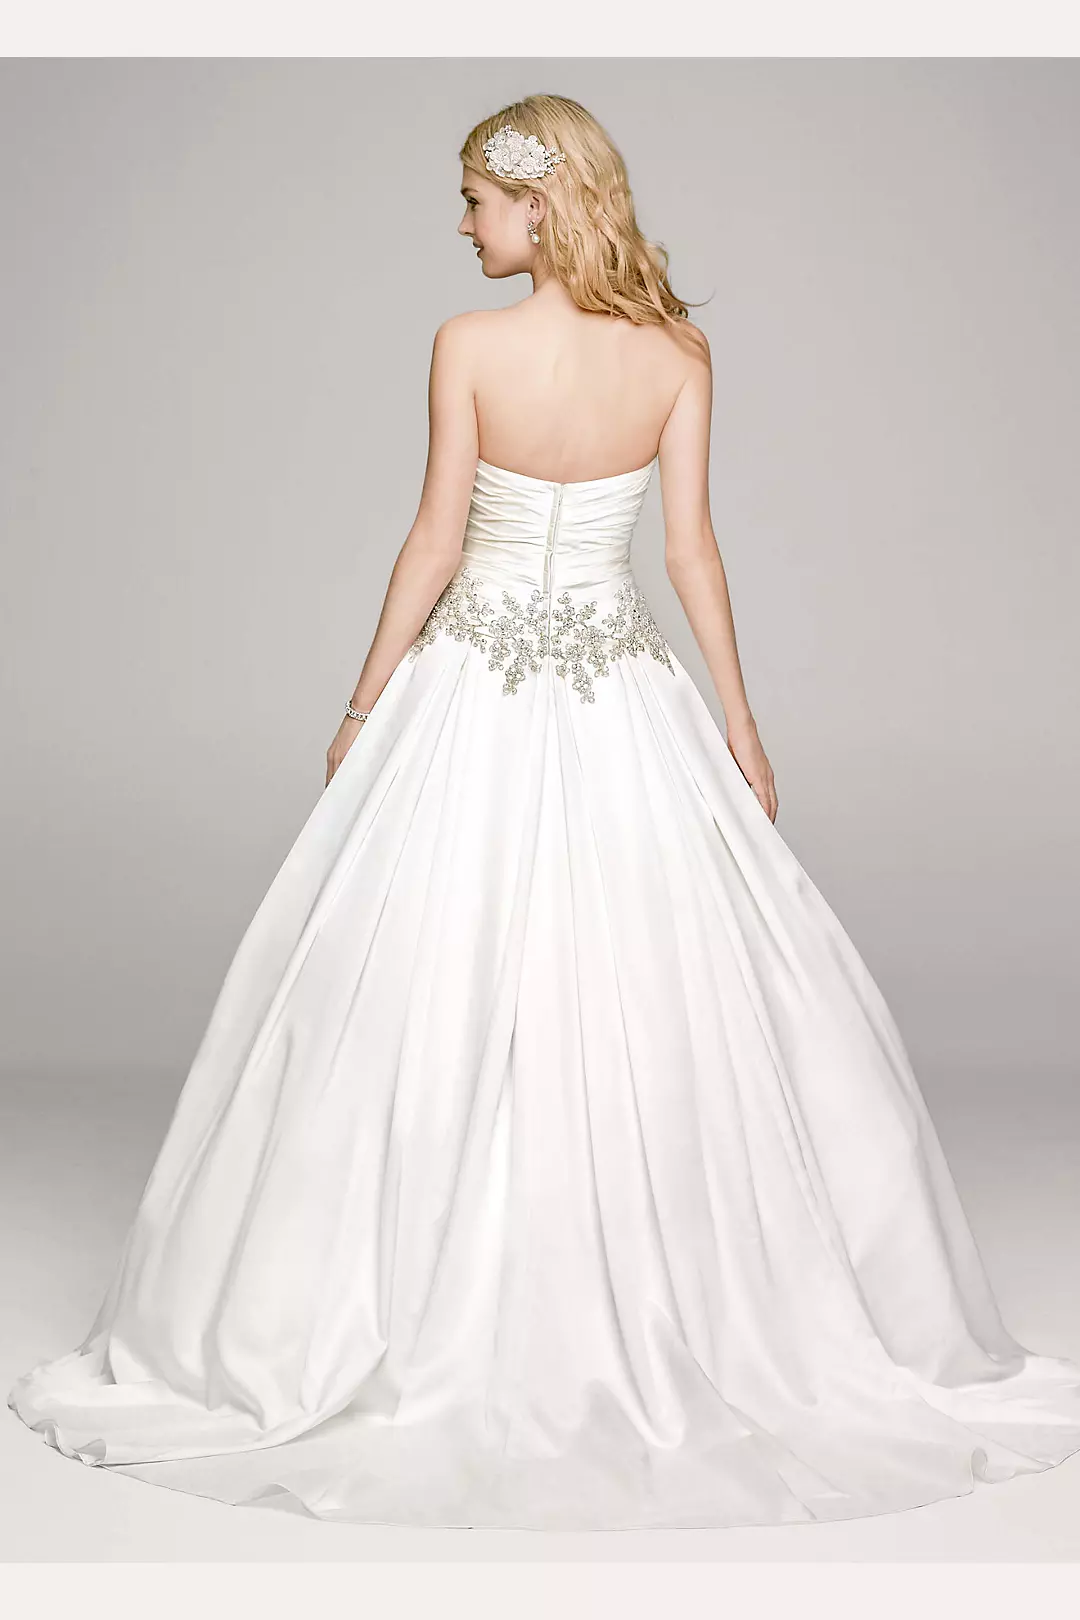 Strapless Satin Ball Gown with Beaded Accents Image 2